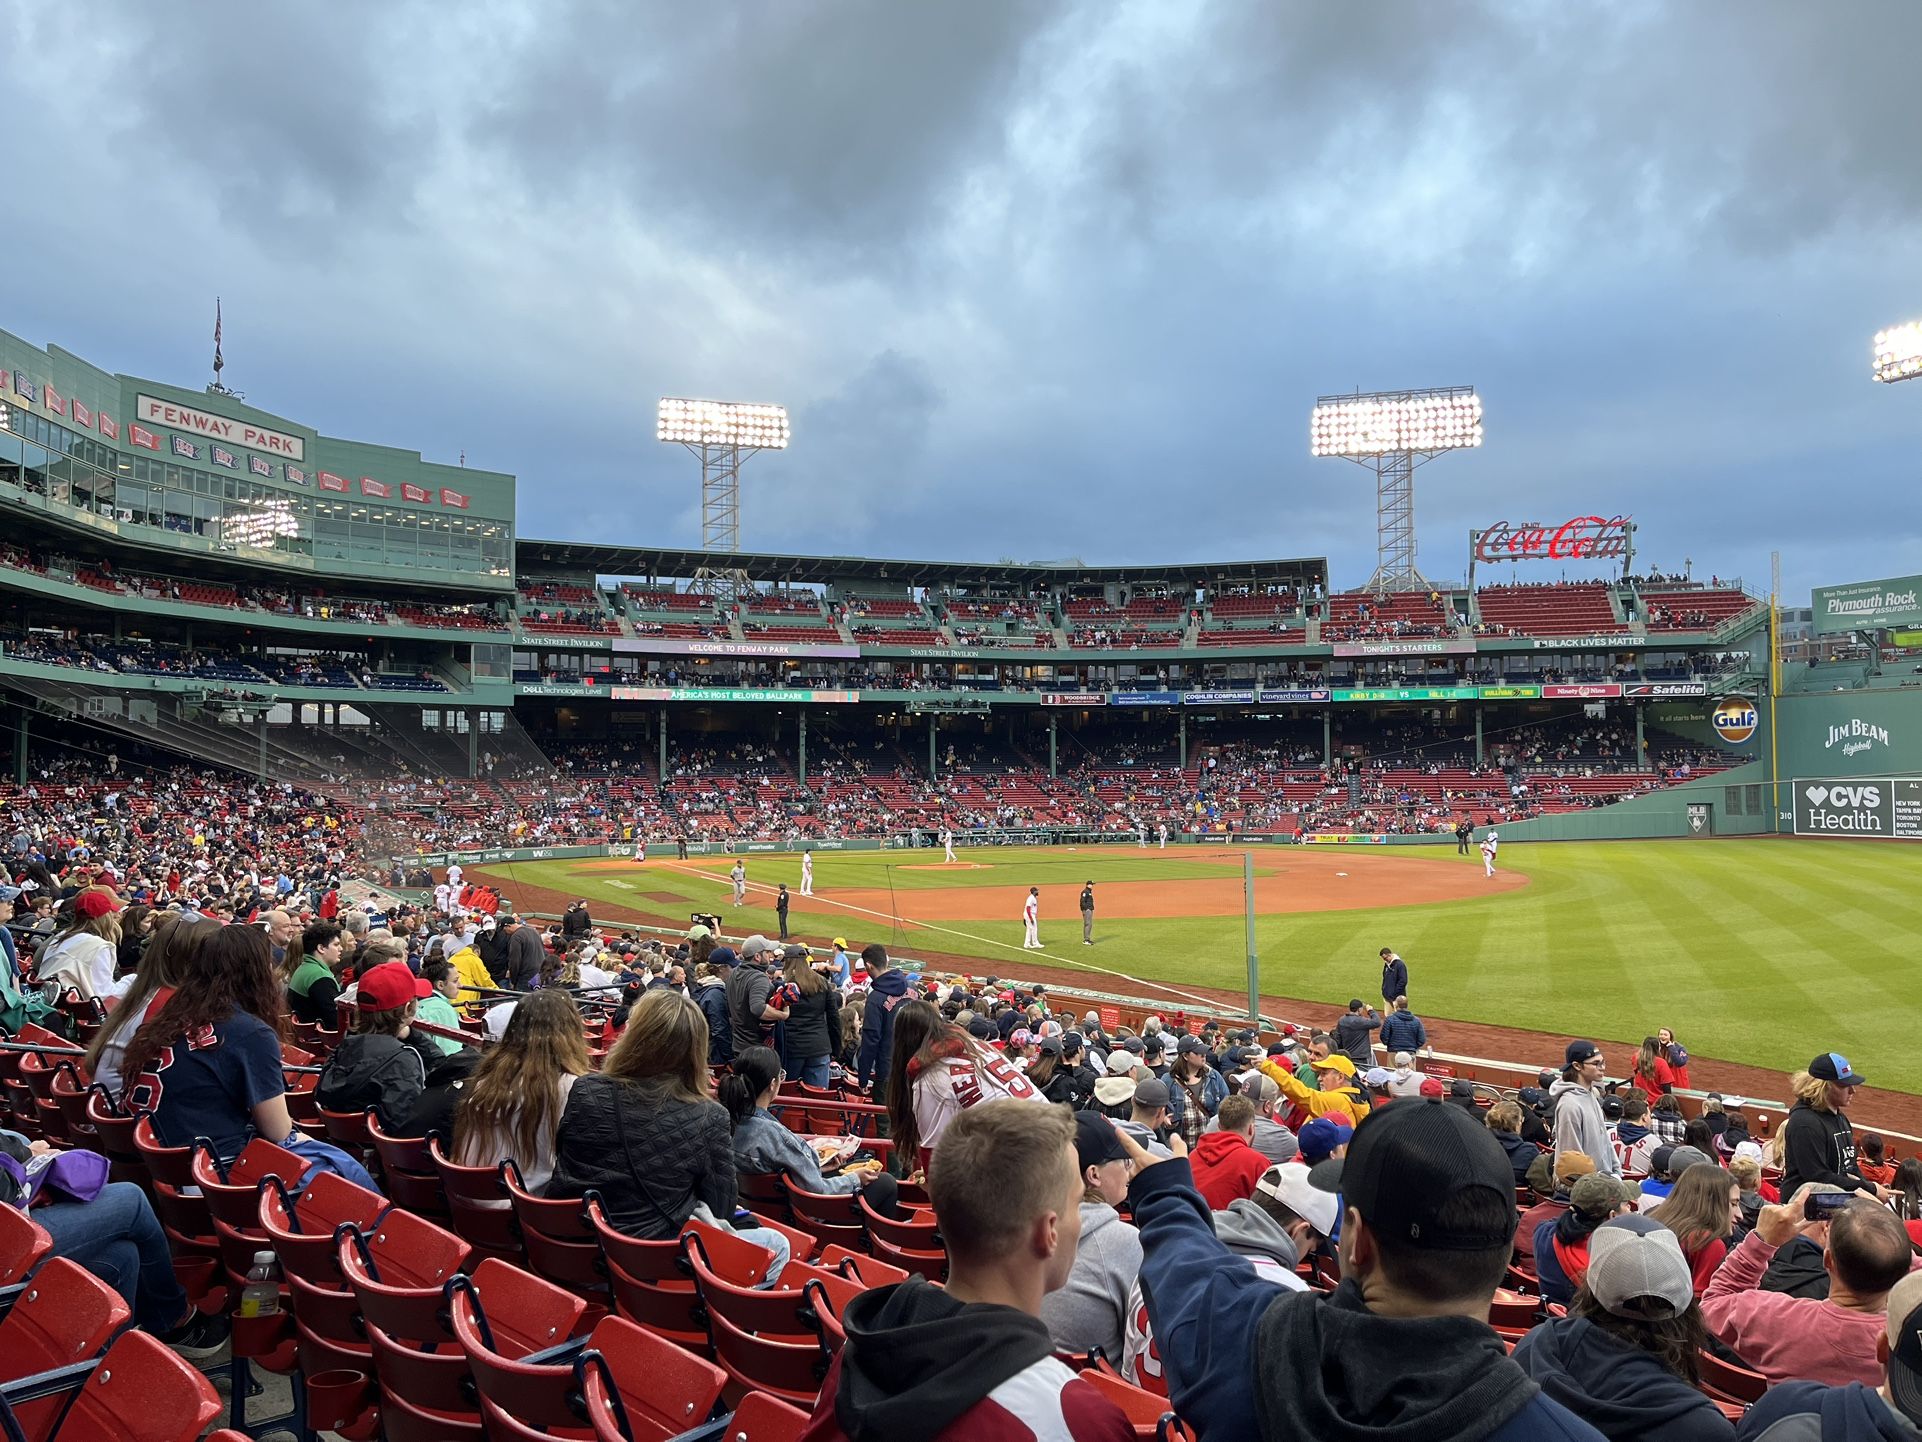 Chicago Cubs at Boston Red Sox - Sun Apr 28 - 2 Tickets